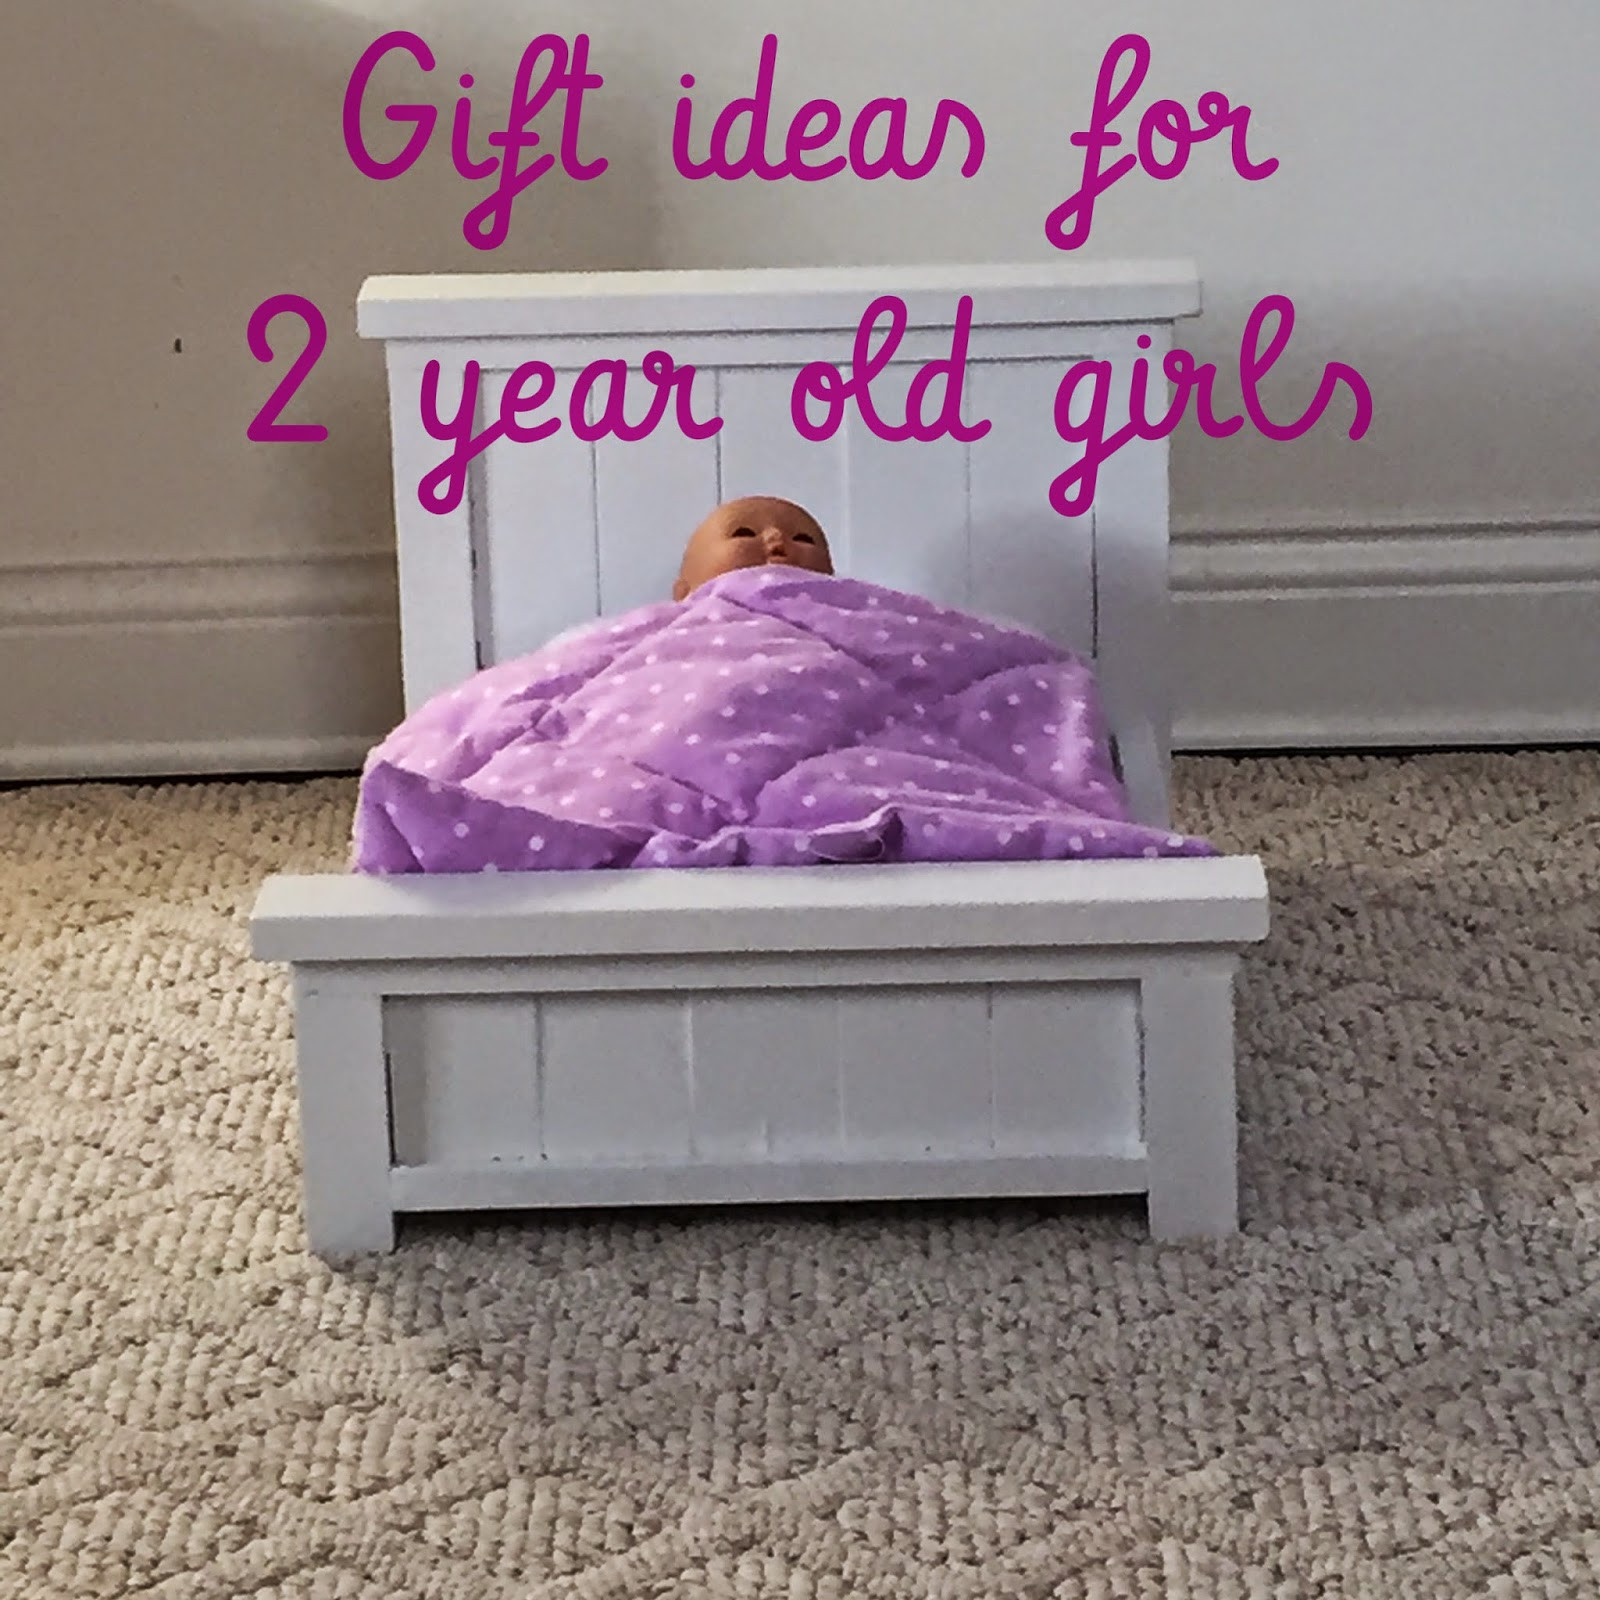 Gift Ideas For 2 Year Old Girls
 Our Delicious Life Gift Ideas for 2 Year Old Girls